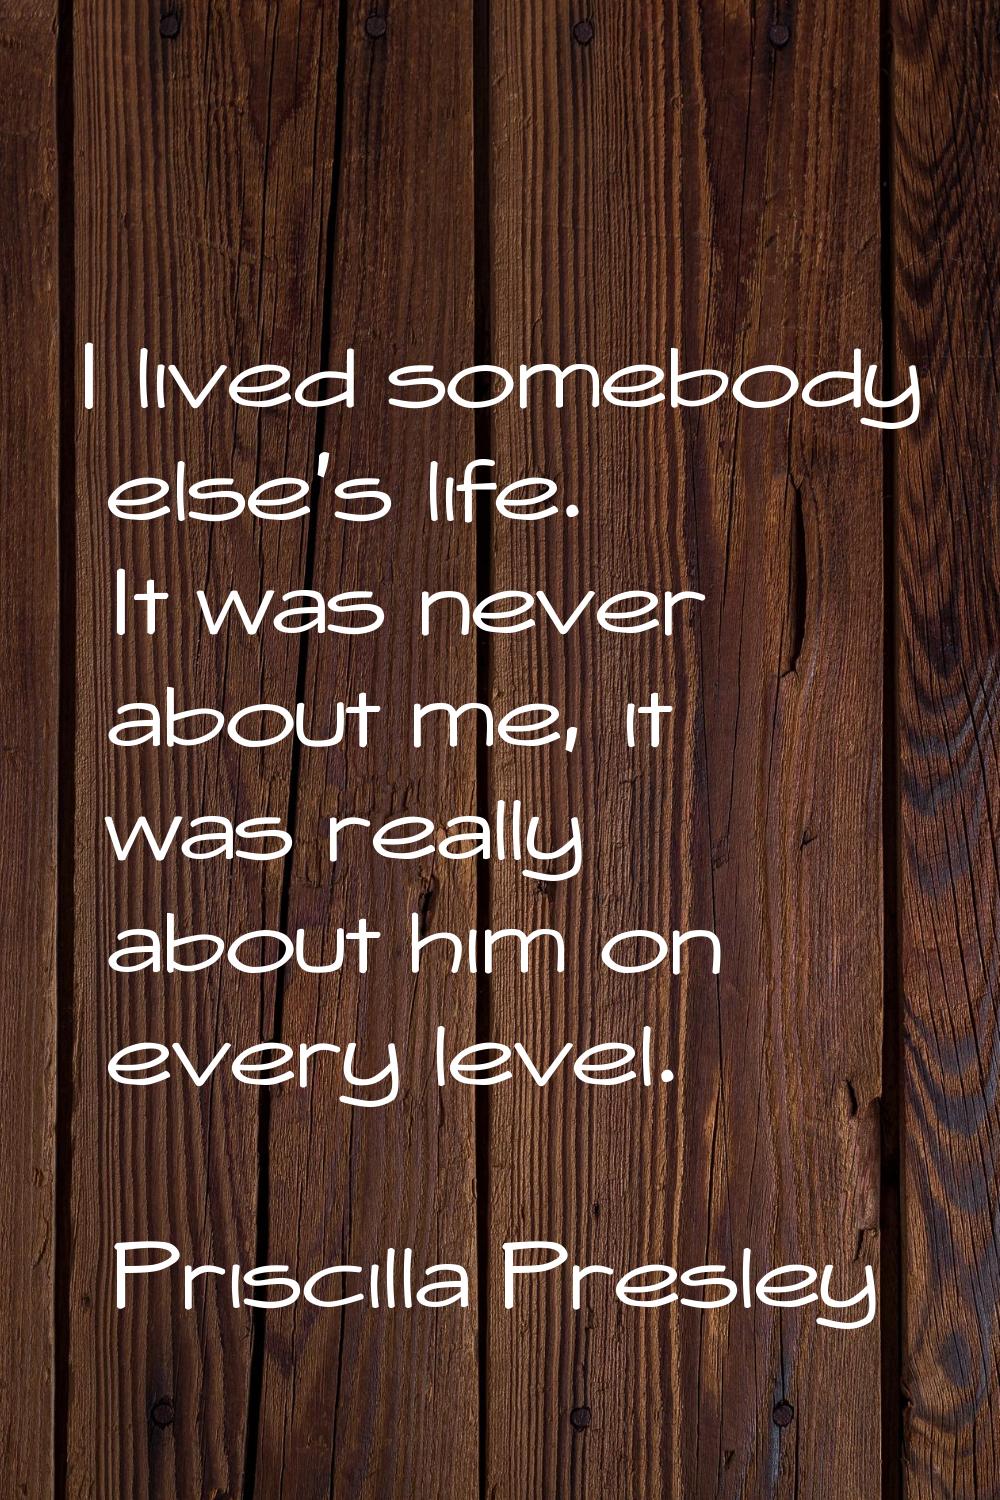 I lived somebody else's life. It was never about me, it was really about him on every level.